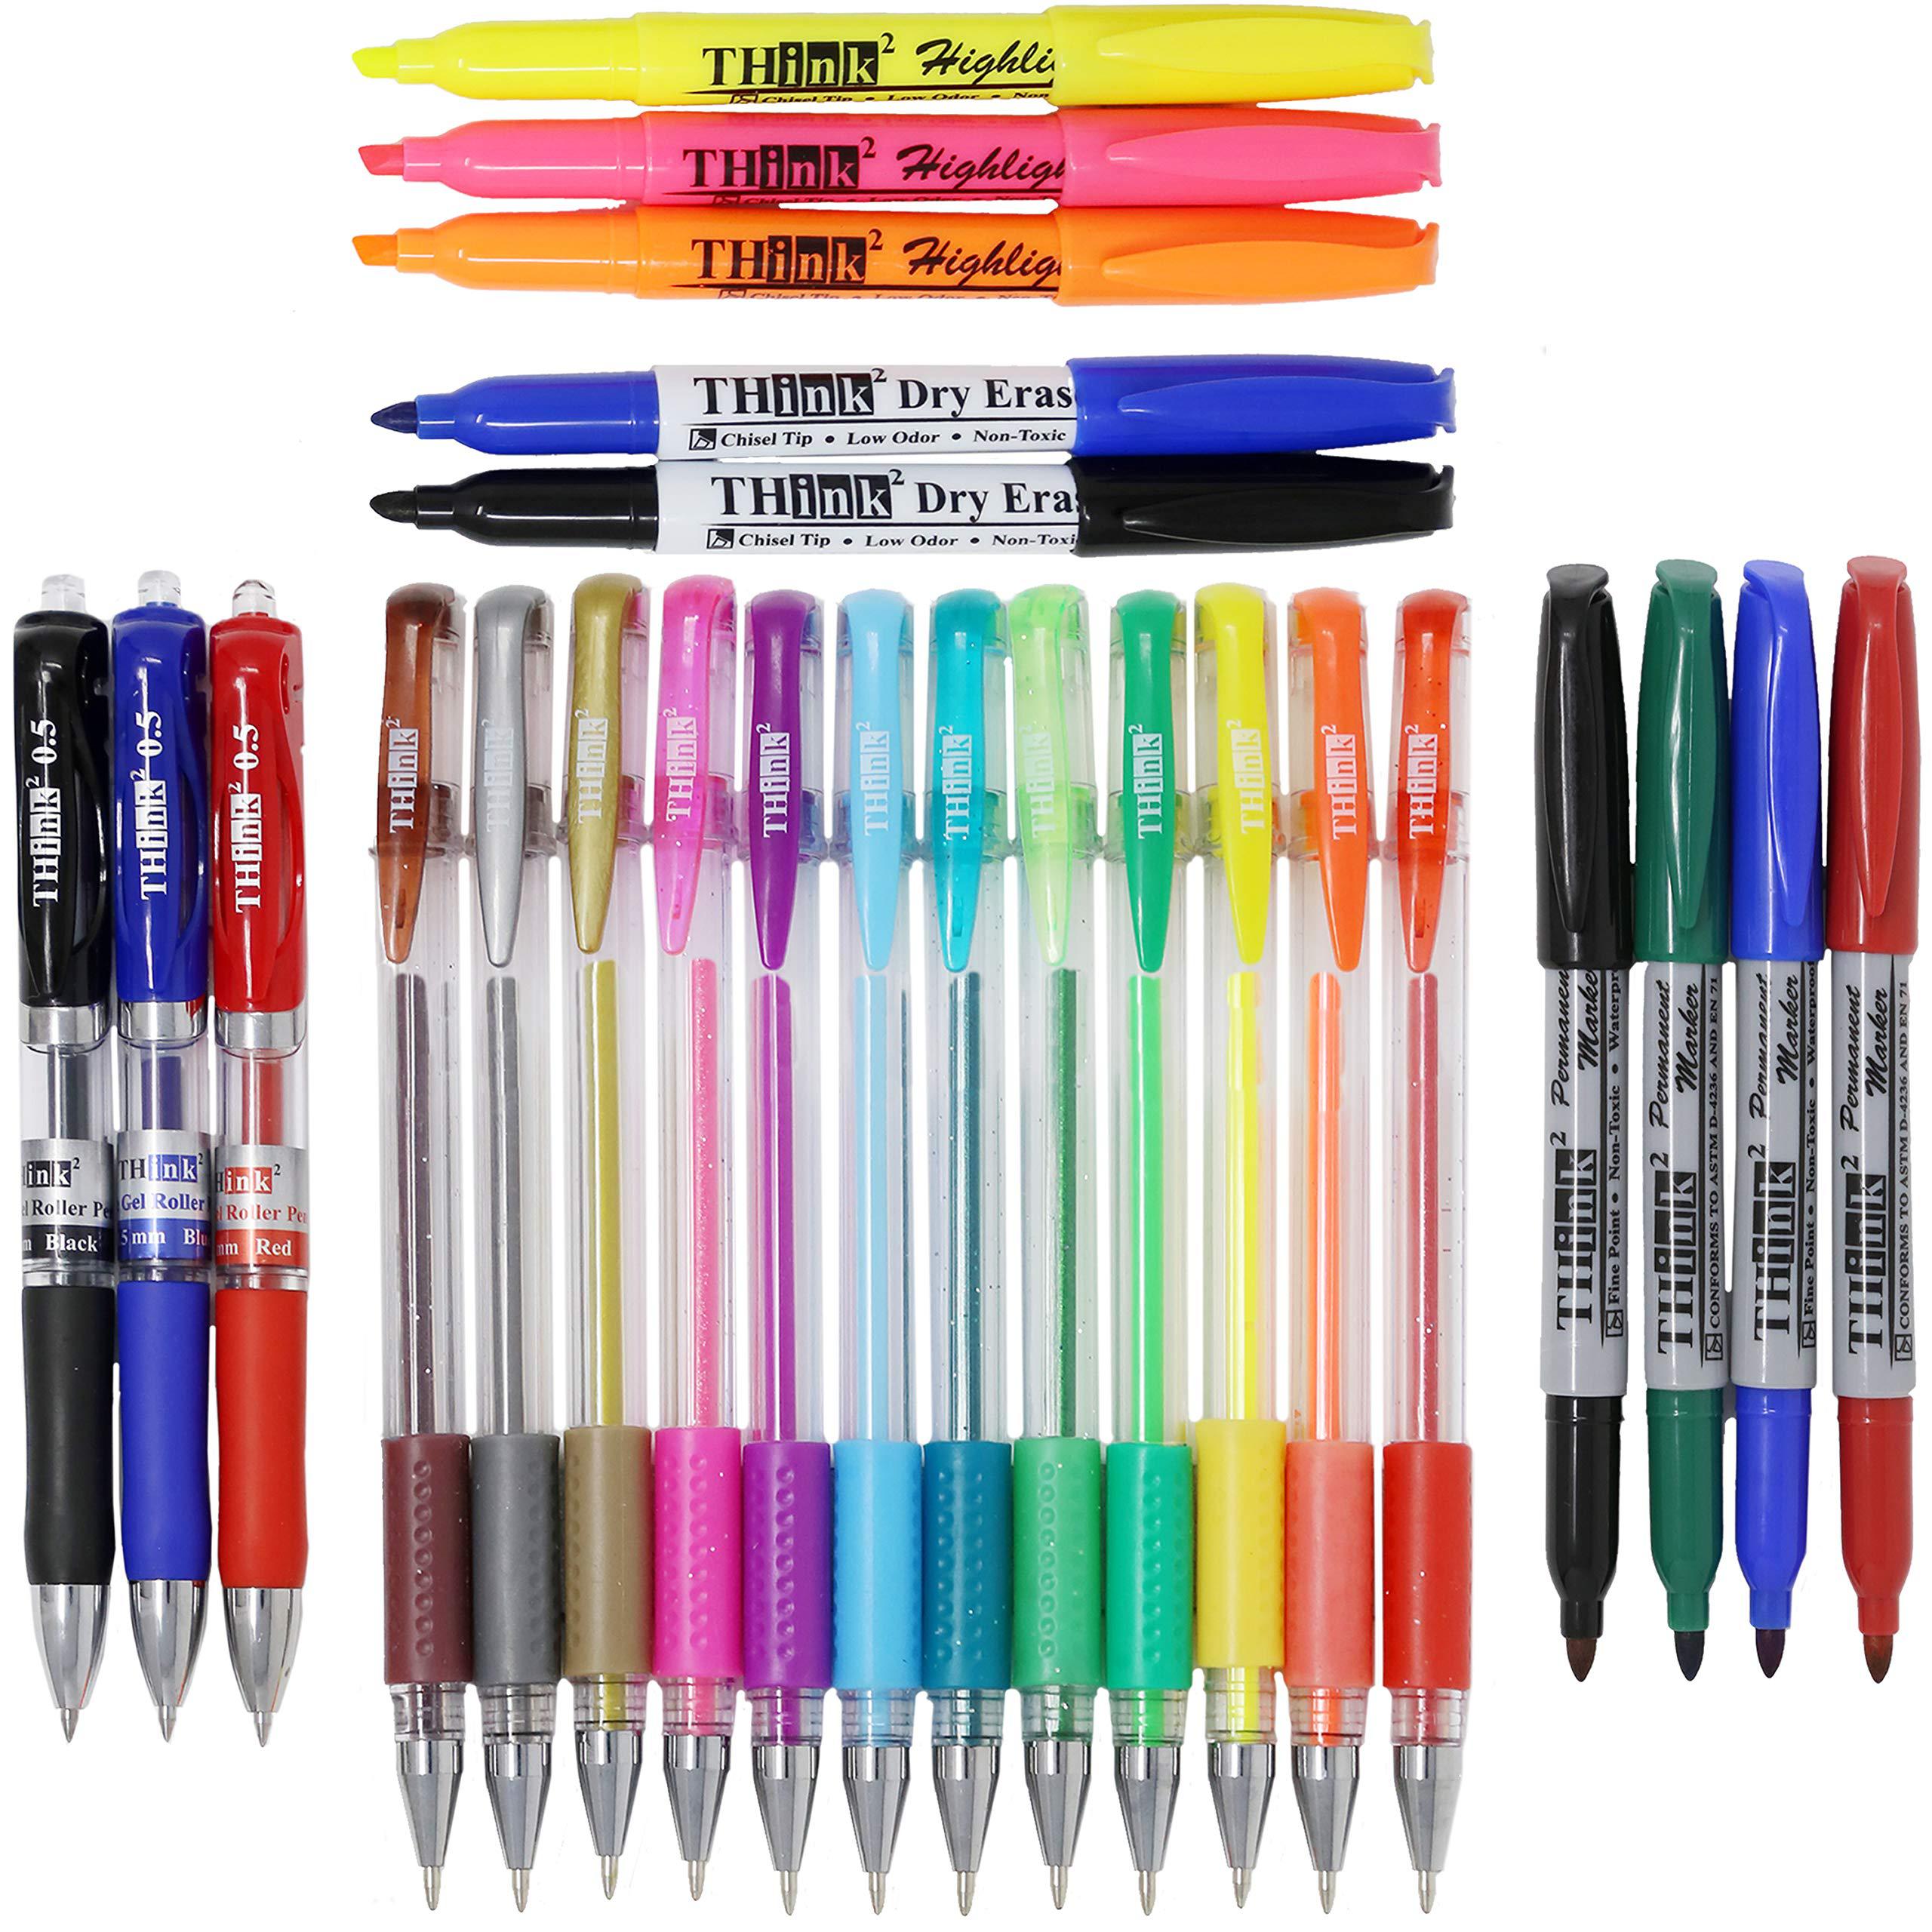 Think2Master [24 Pack] Think2 School Supplies Markers & Gel Pens School Supplies Kit. Includes 3 Highlighter, 4 Permanent Markers, 2 Dry Eras